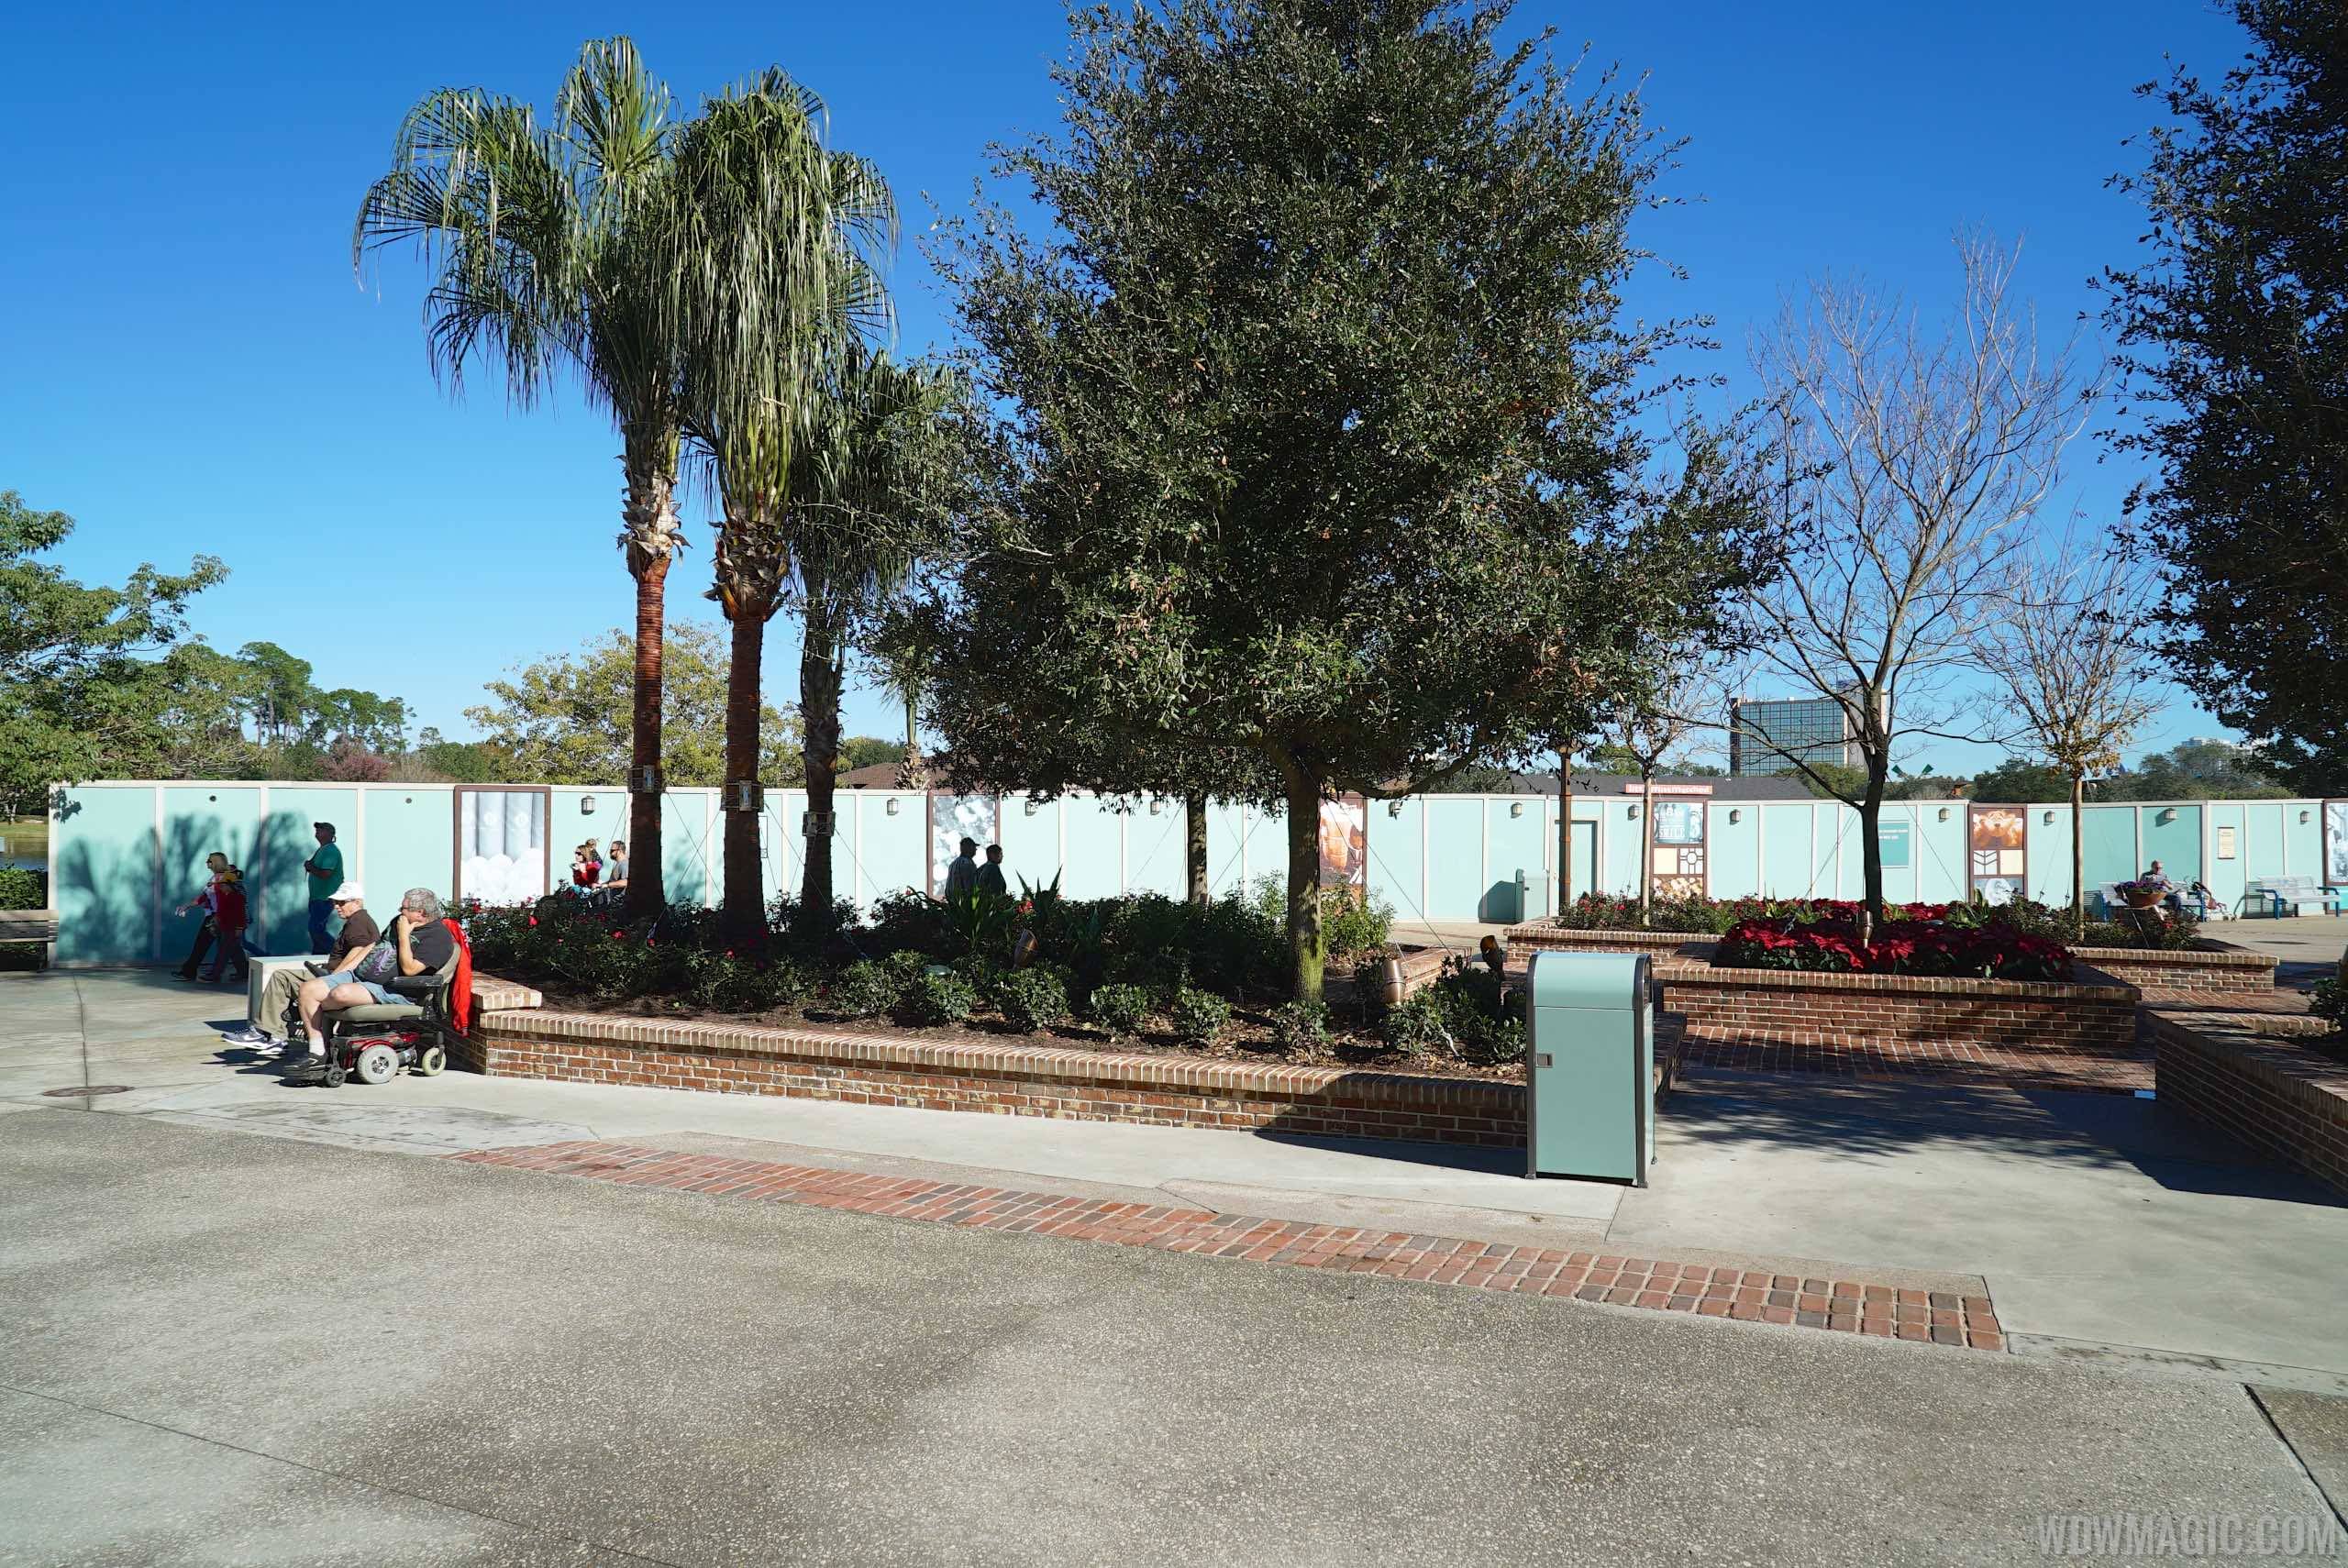 PHOTOS - More construction walls come down around Inspiration Park in the Marketplace